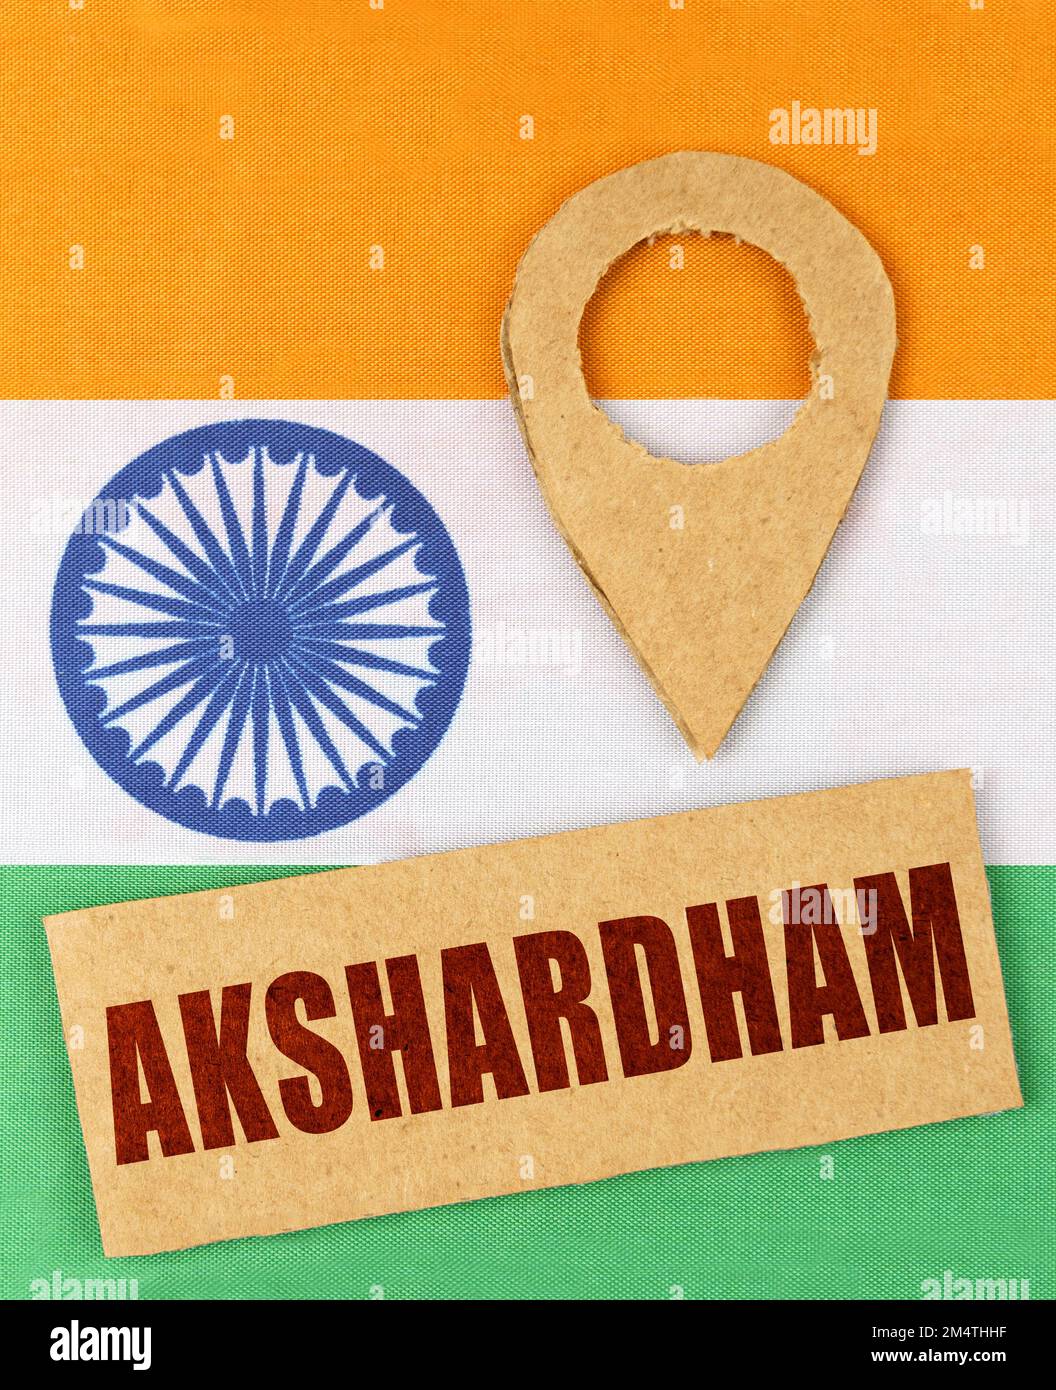 The concept of tourism, vacation and geolocation. On the Indian flag, a geolocation symbol and a sign with the inscription - Akshardham Stock Photo